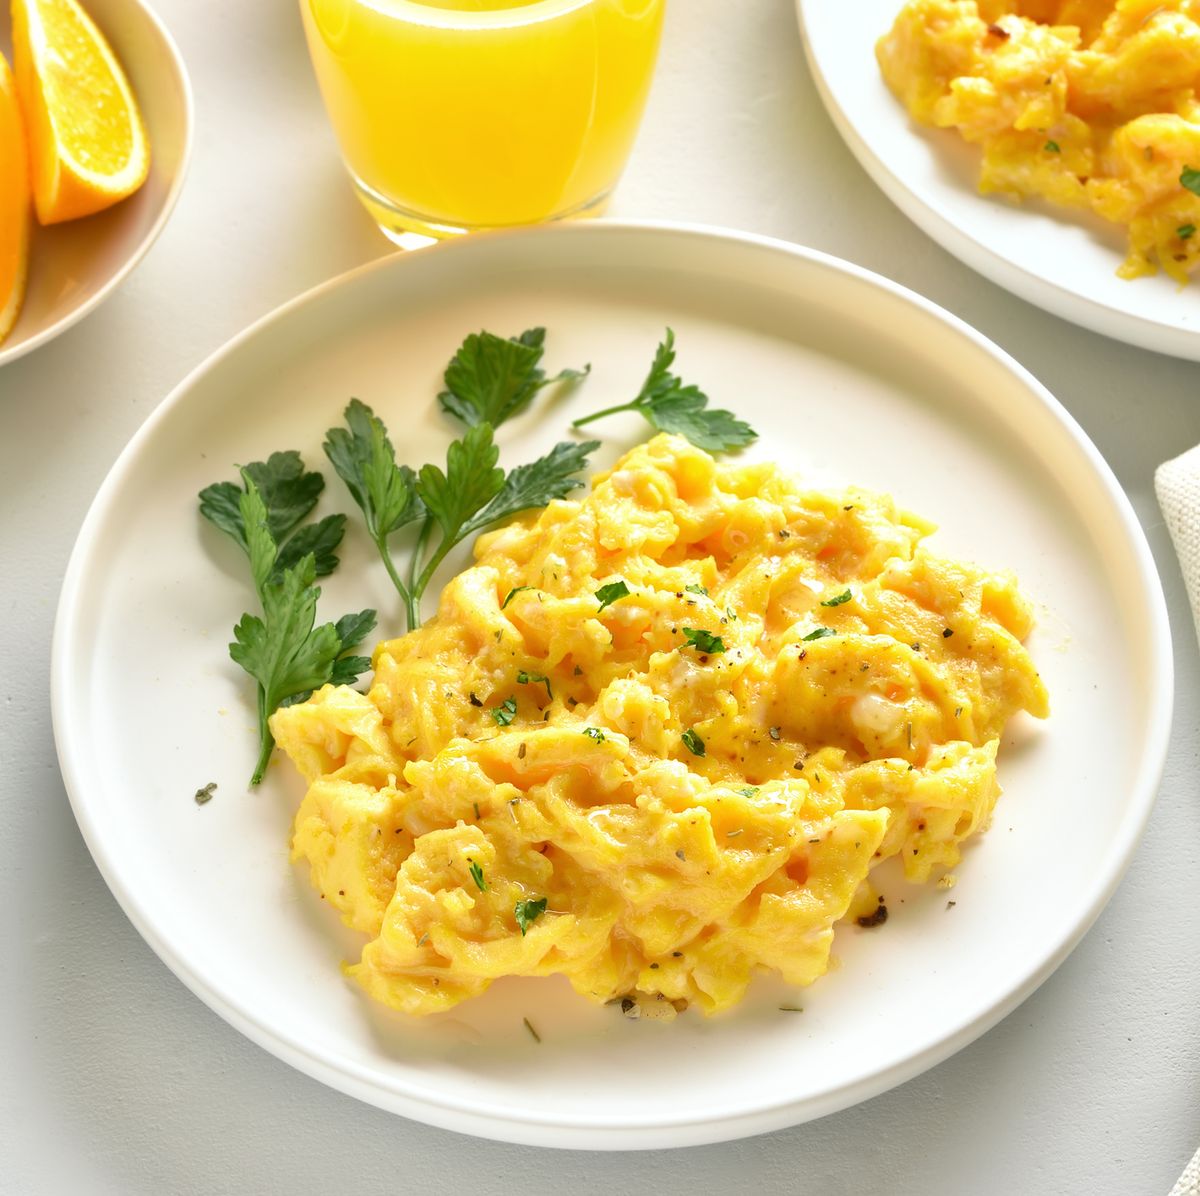 a plate of scrambled whole eggs peppered with fresh chives